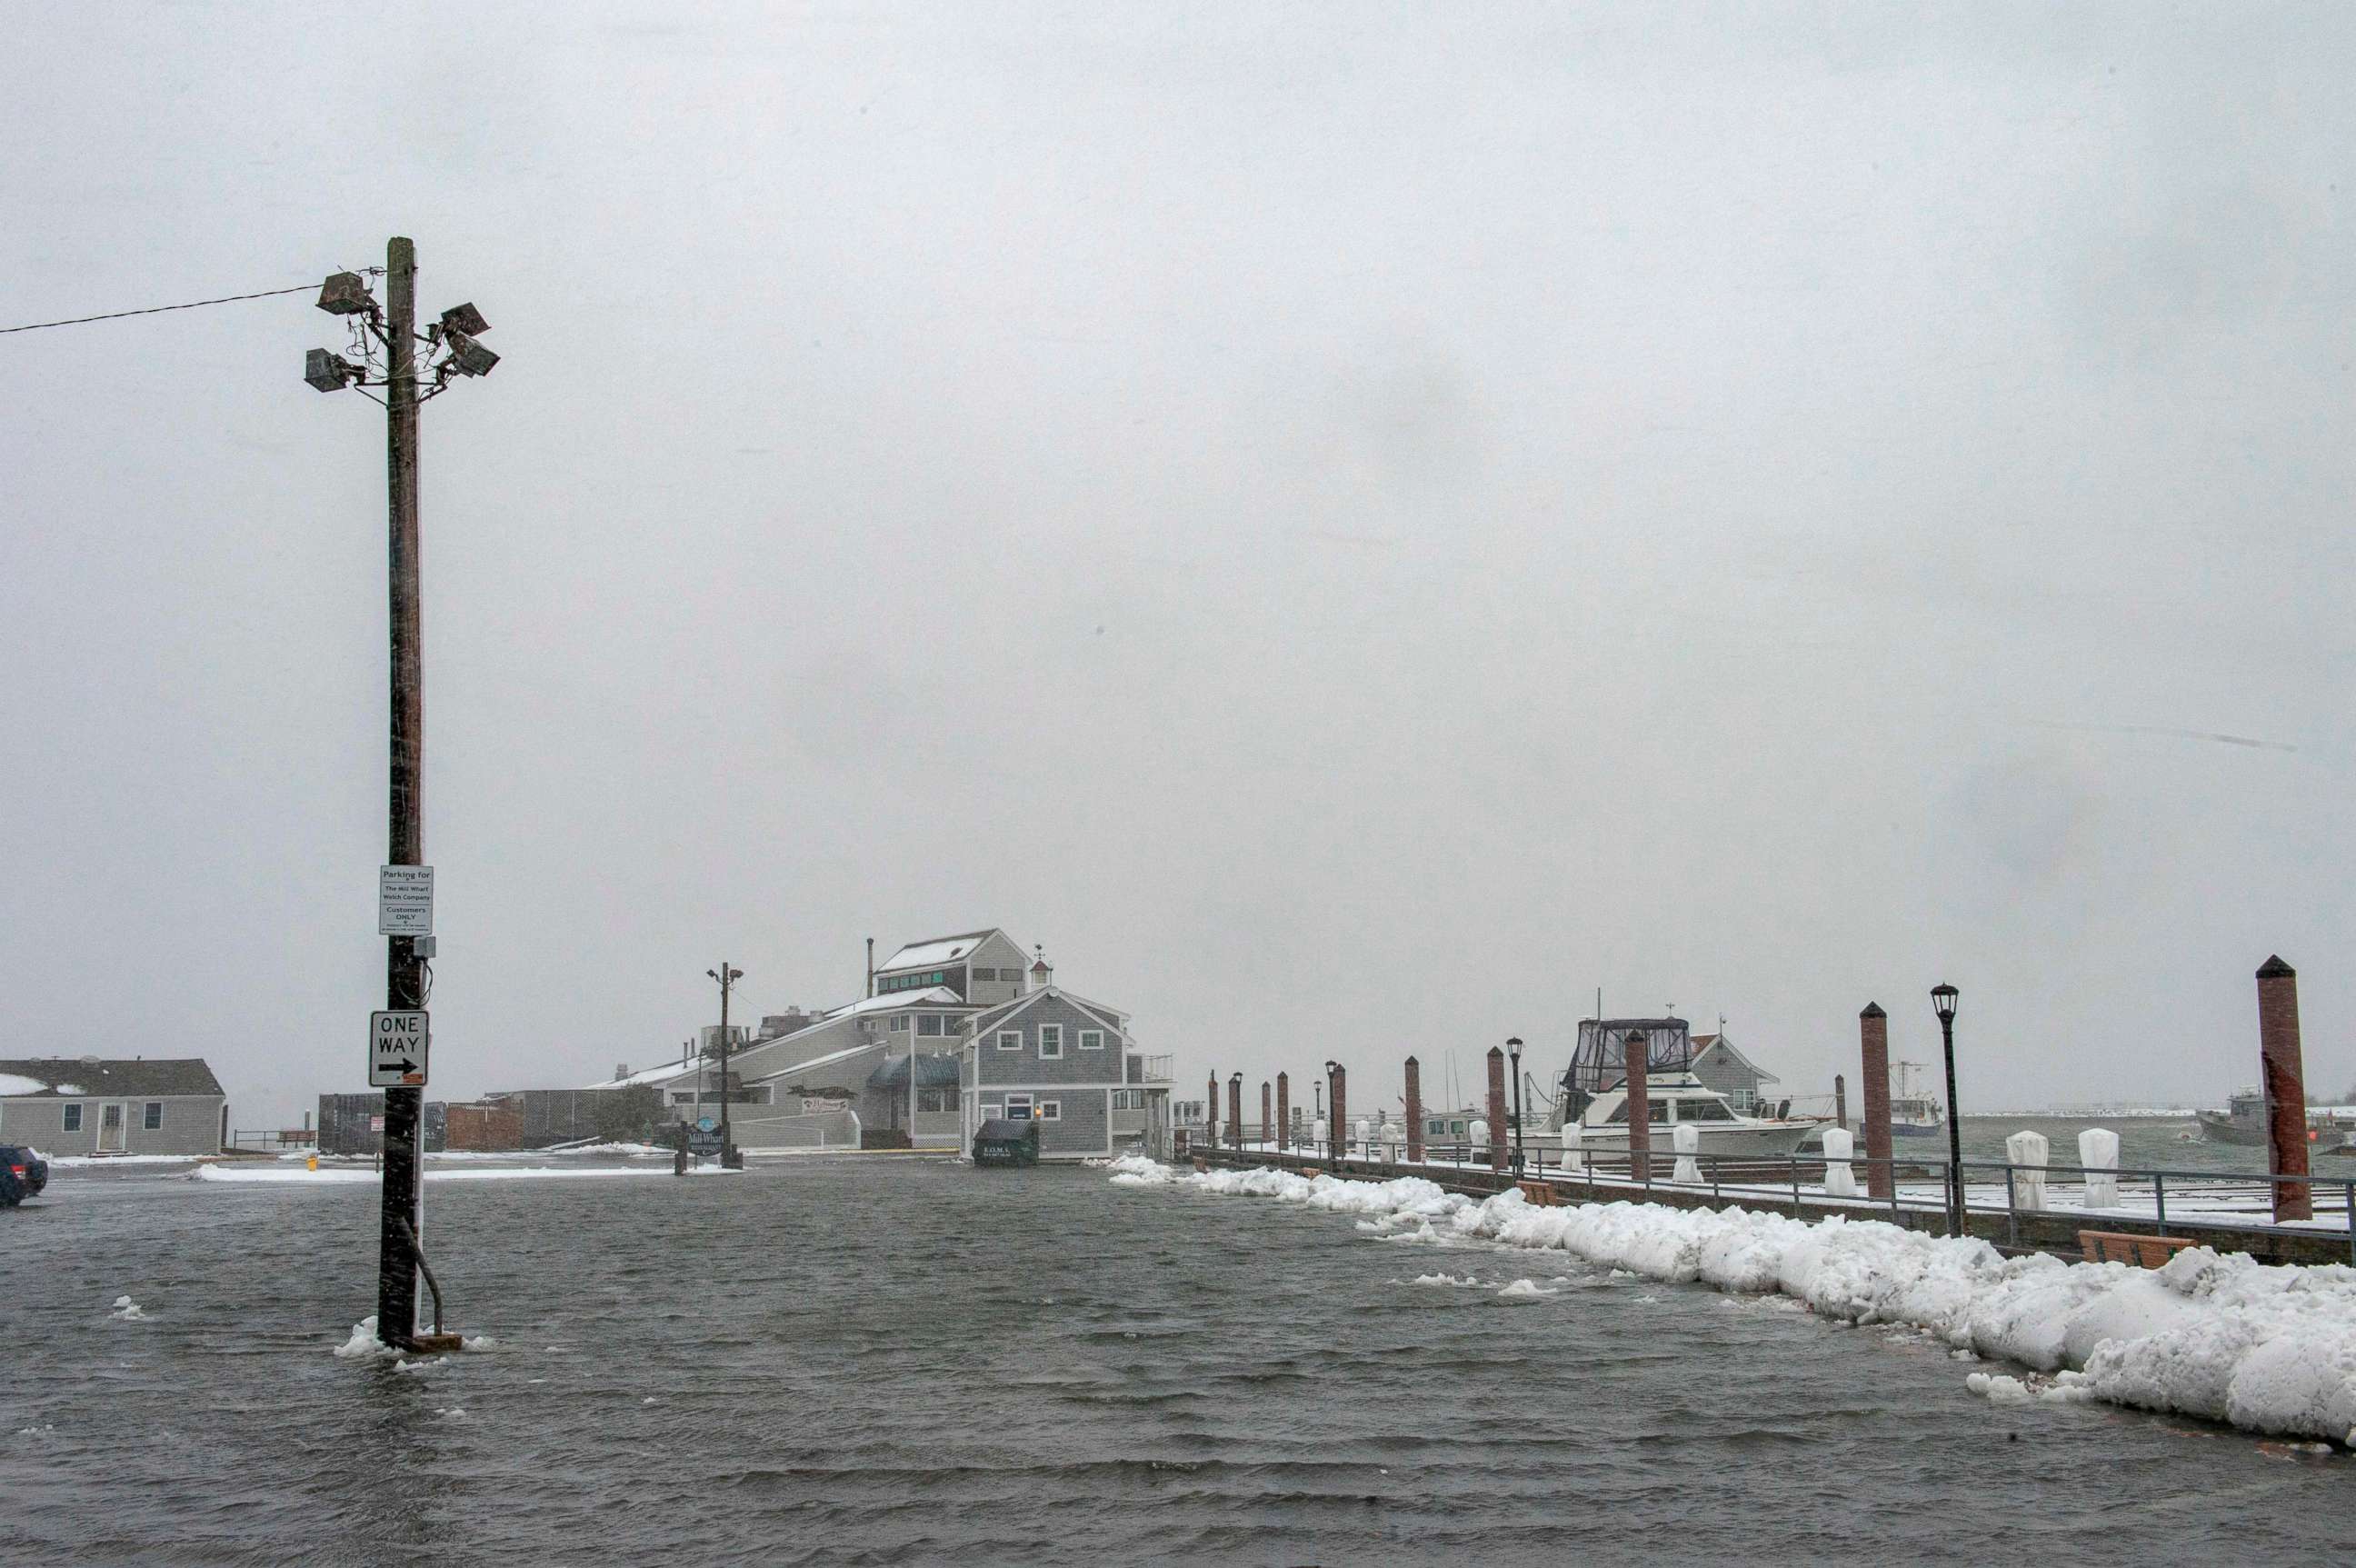 PHOTO: Flooding caused by high tide and storm surge is seen in Scituate, Massachusetts on Dec. 17, 2020.